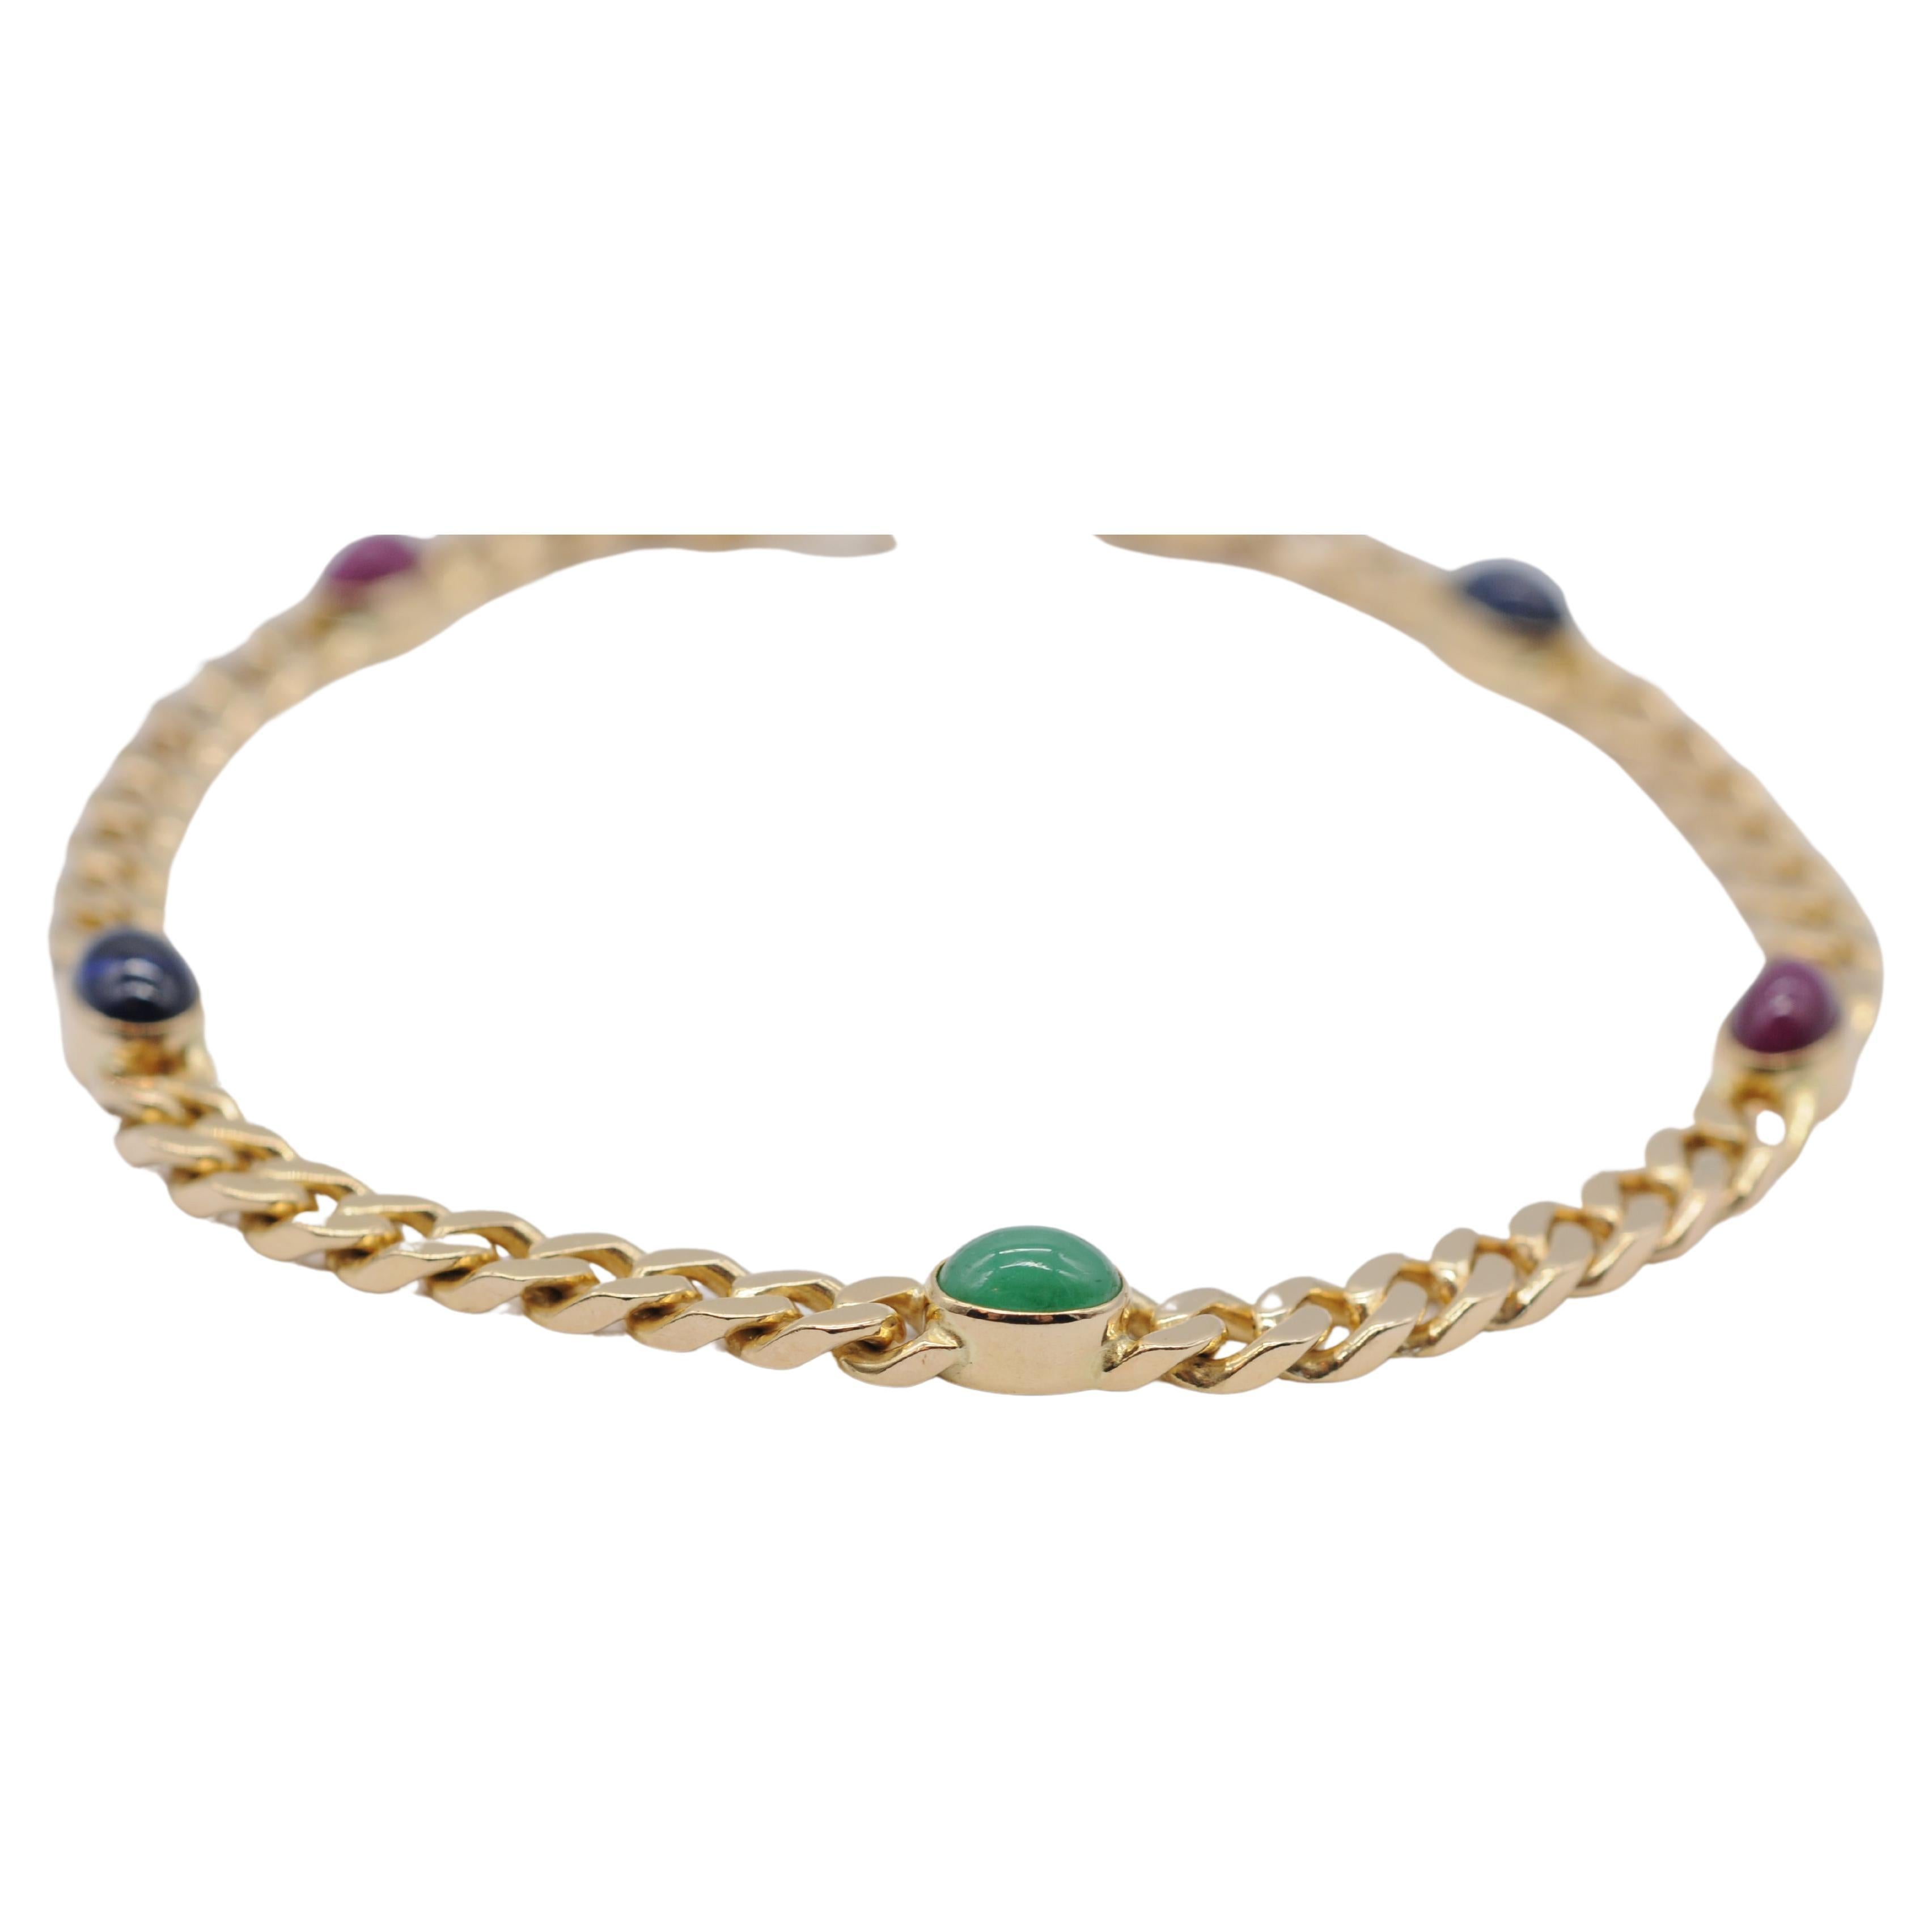 Noble 14k yellow gold bracelet with cabochon For Sale 4